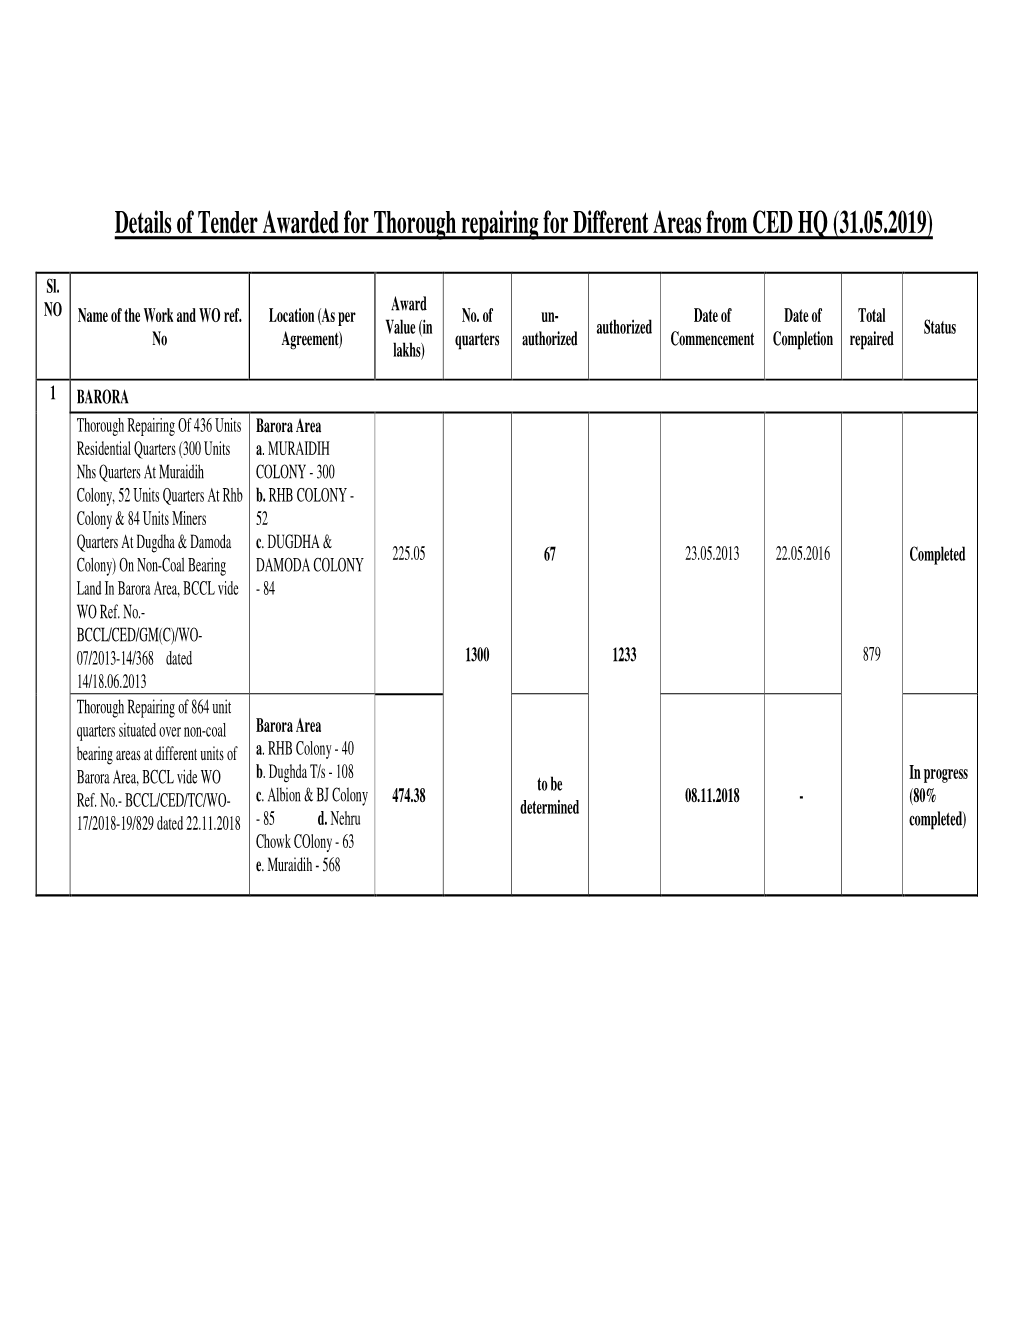 Details of Tender Awarded for Thorough Repairing for Different Areas from CED HQ (31.05.2019)